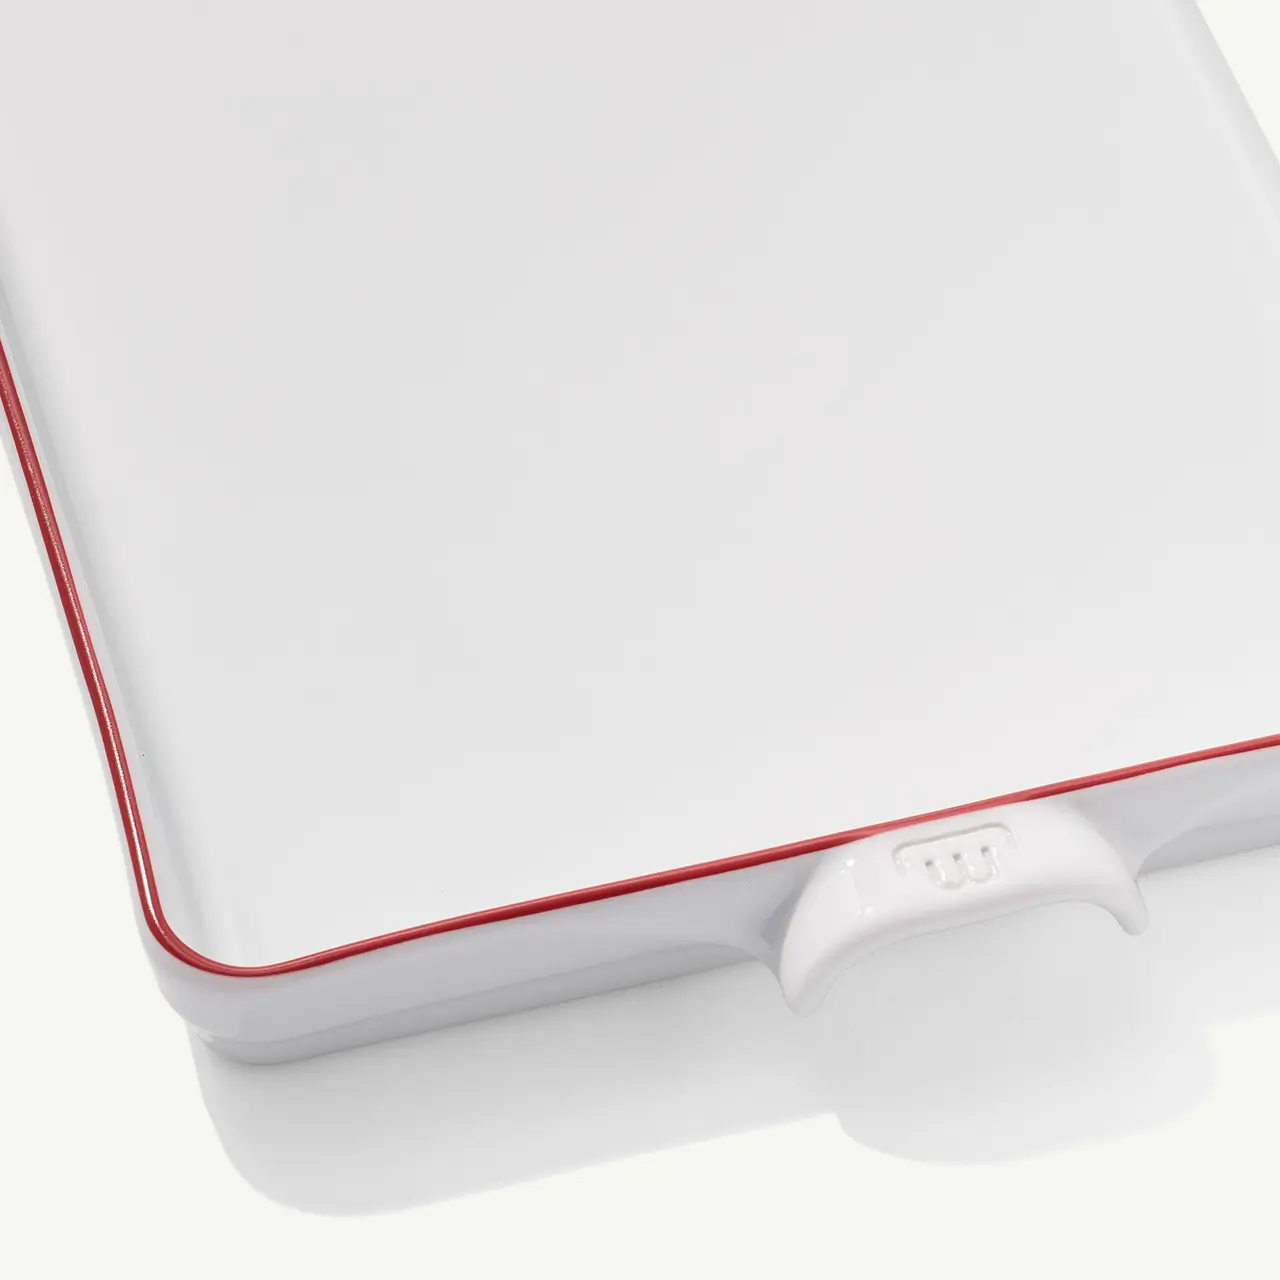 A closed white laptop with a red trim and a visible charging port.